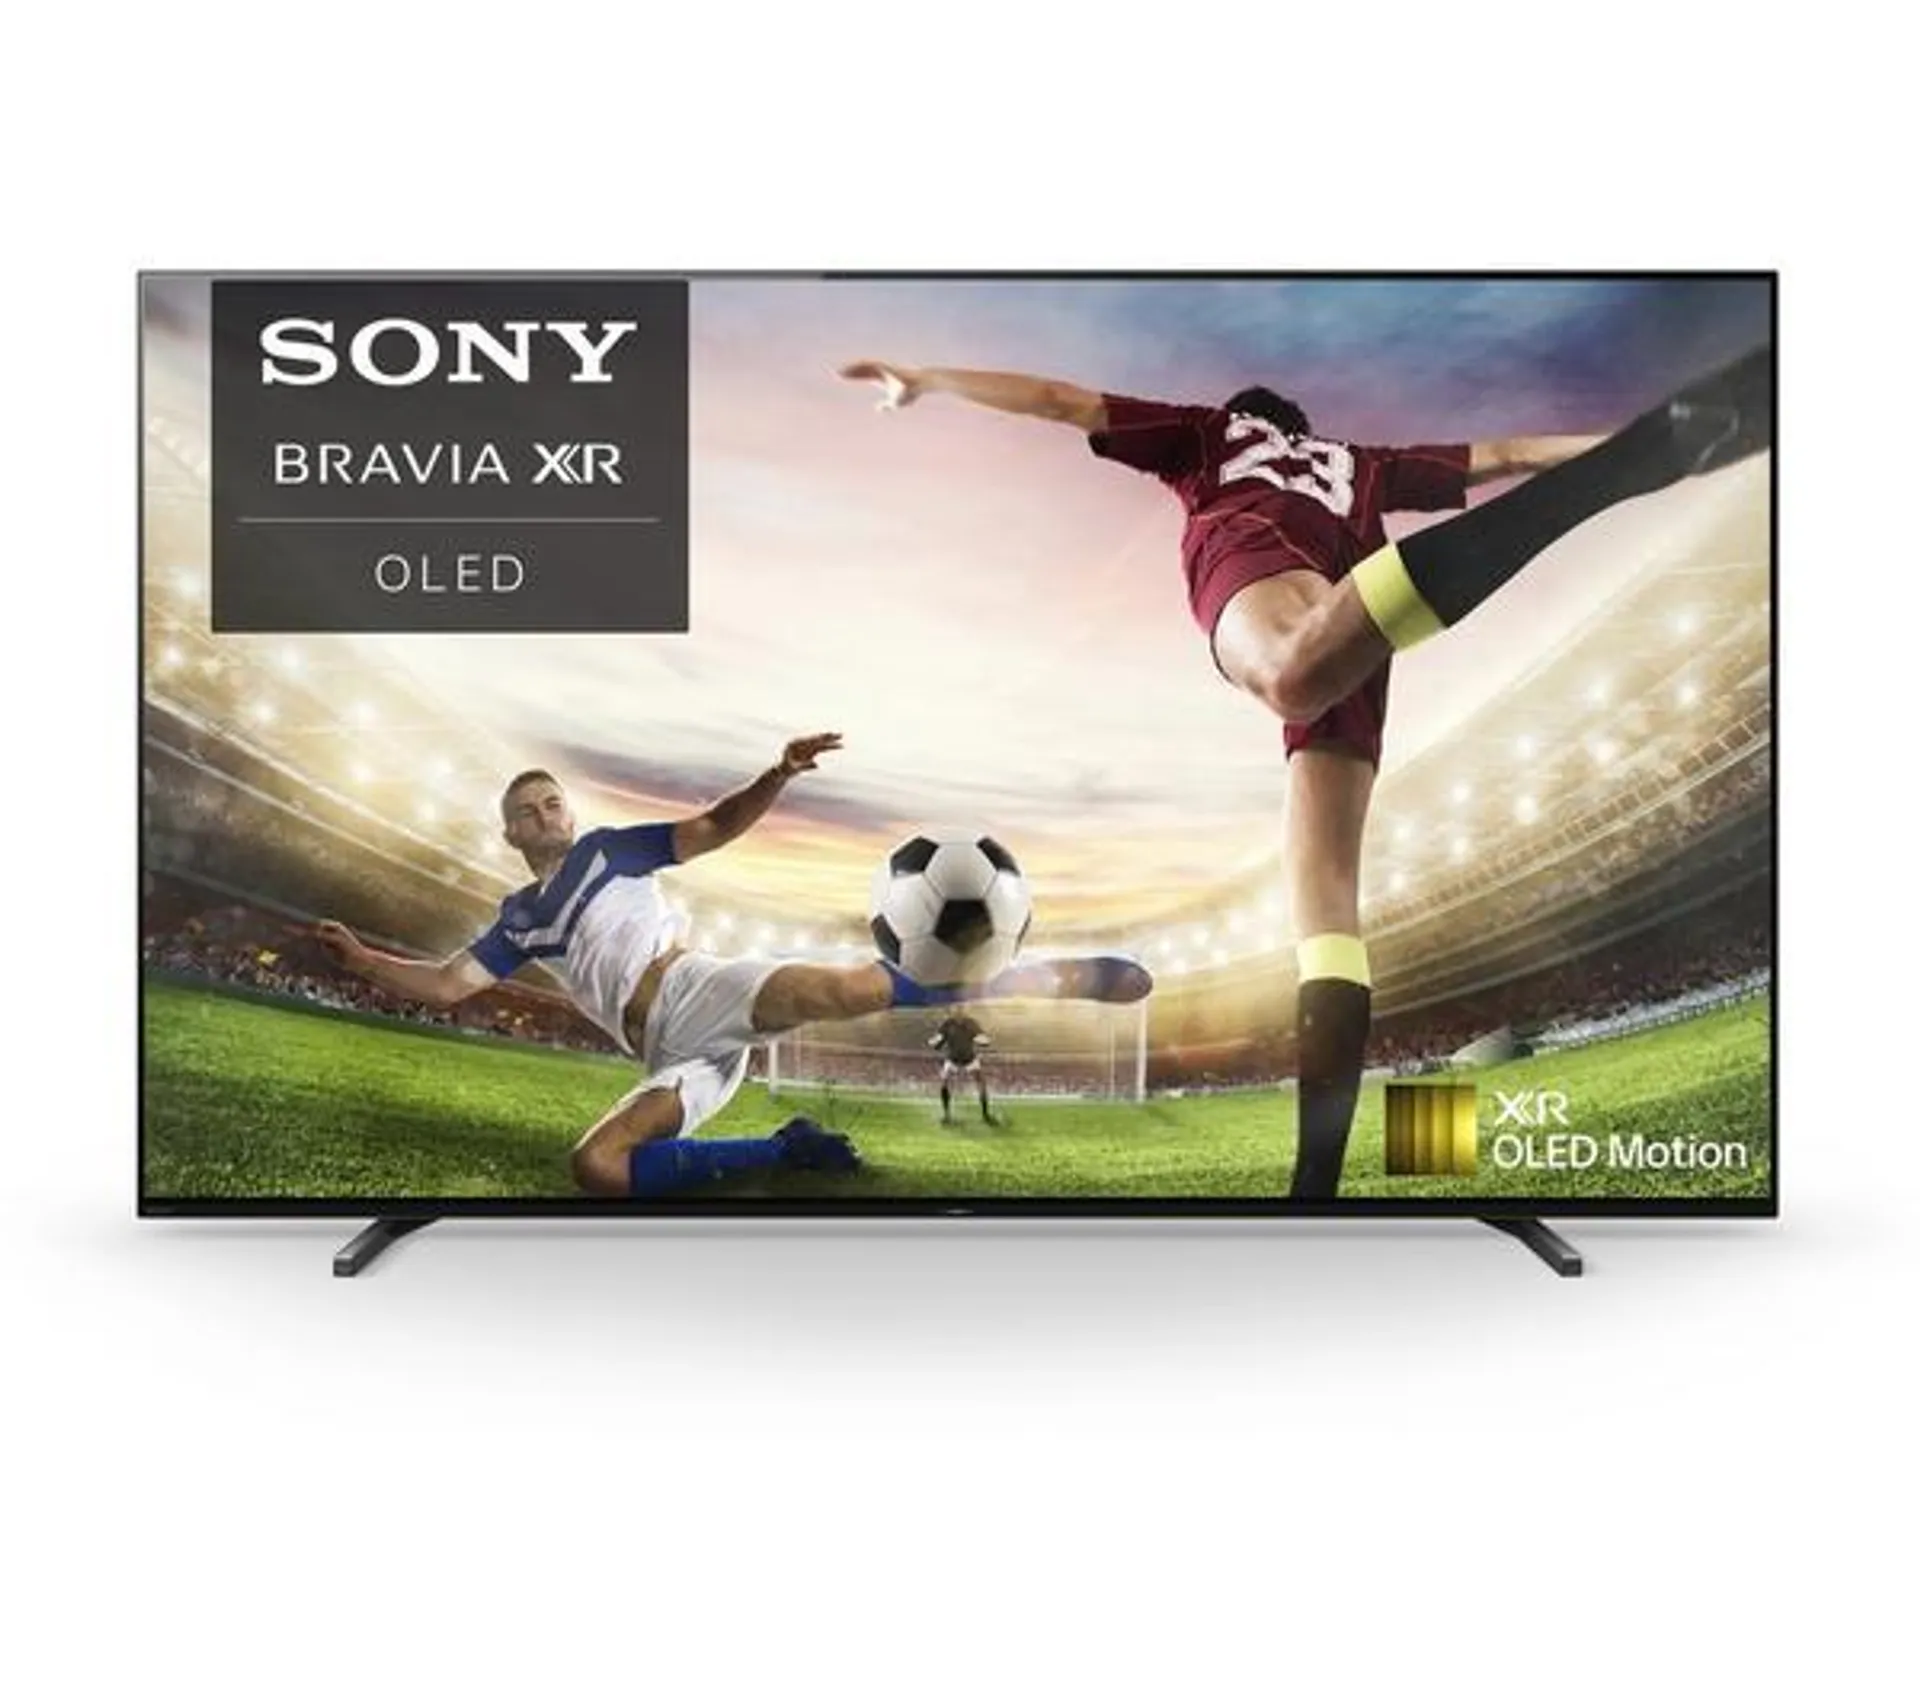 SONY BRAVIA XR55A80JU 55" Smart 4K Ultra HD HDR OLED TV with Google TV & Assistant